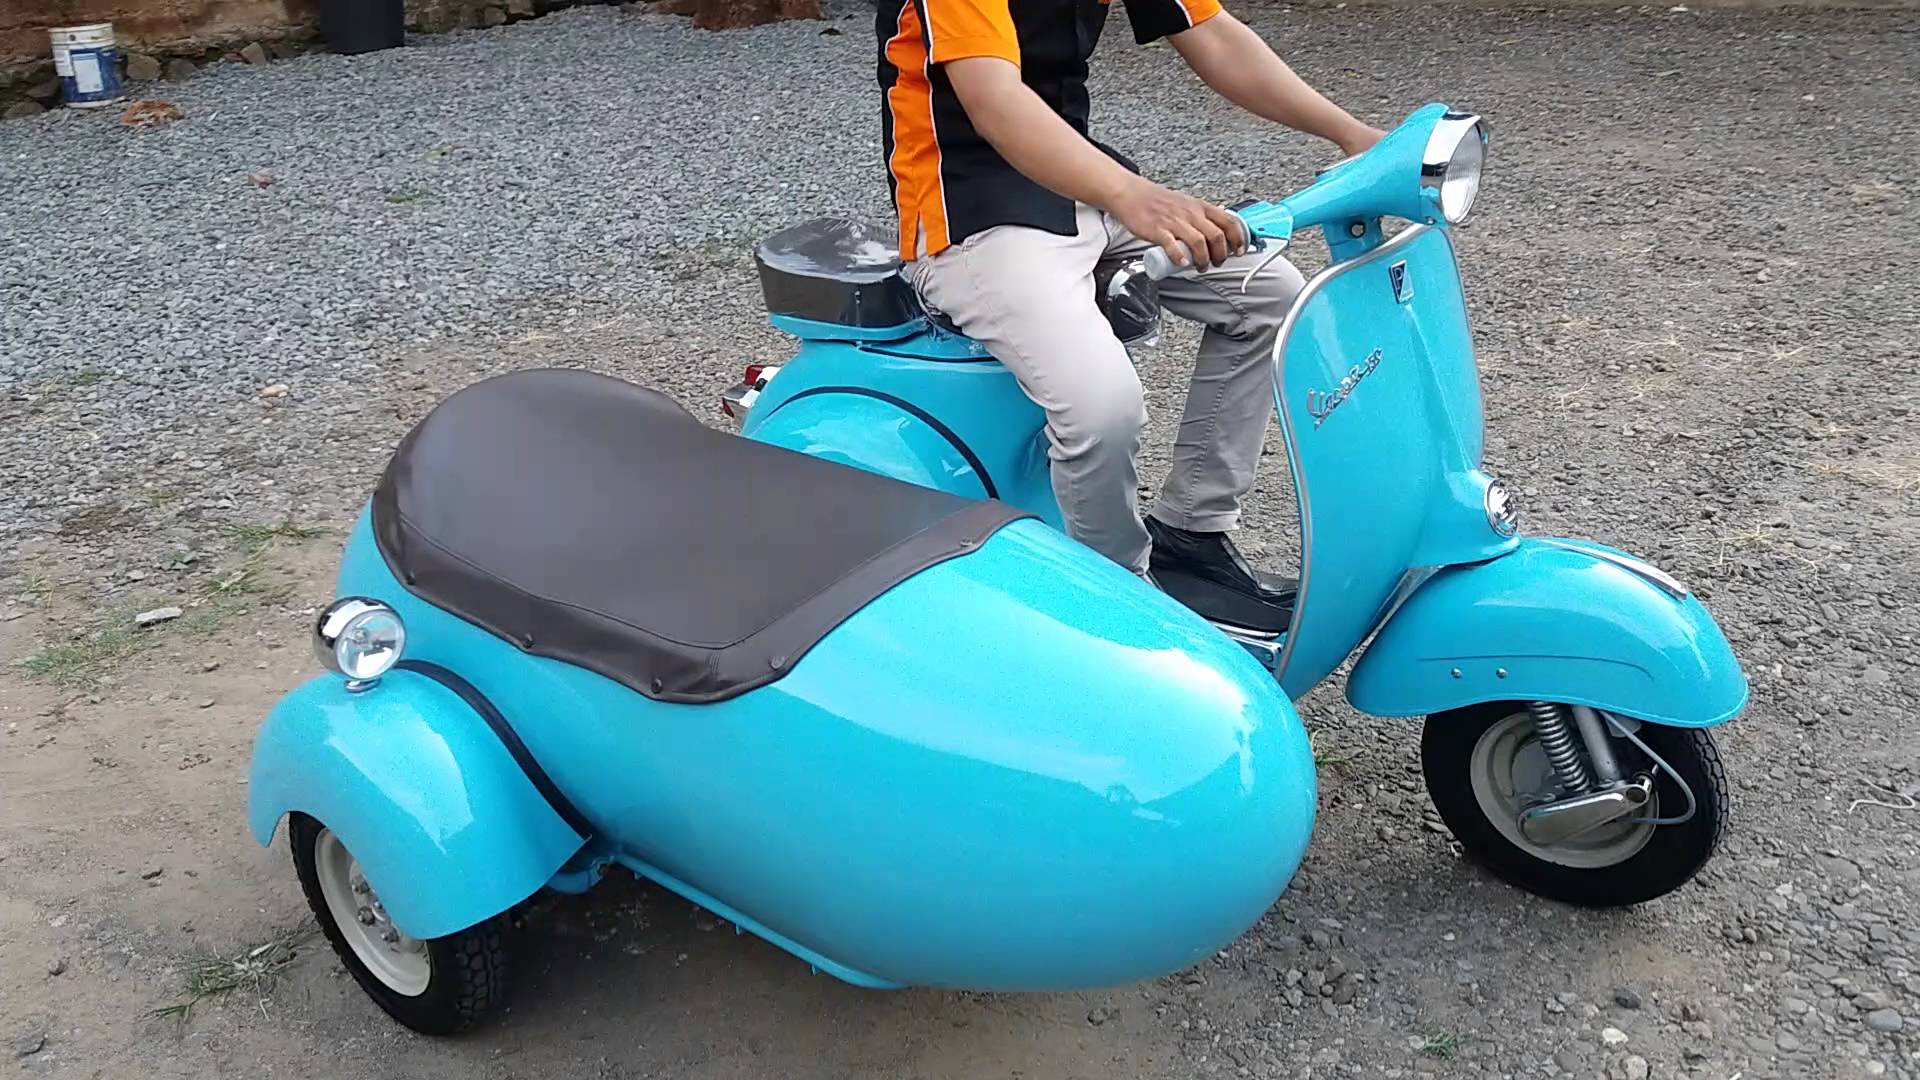 Vespa scooter piaggio with sidecar blue - YouTube